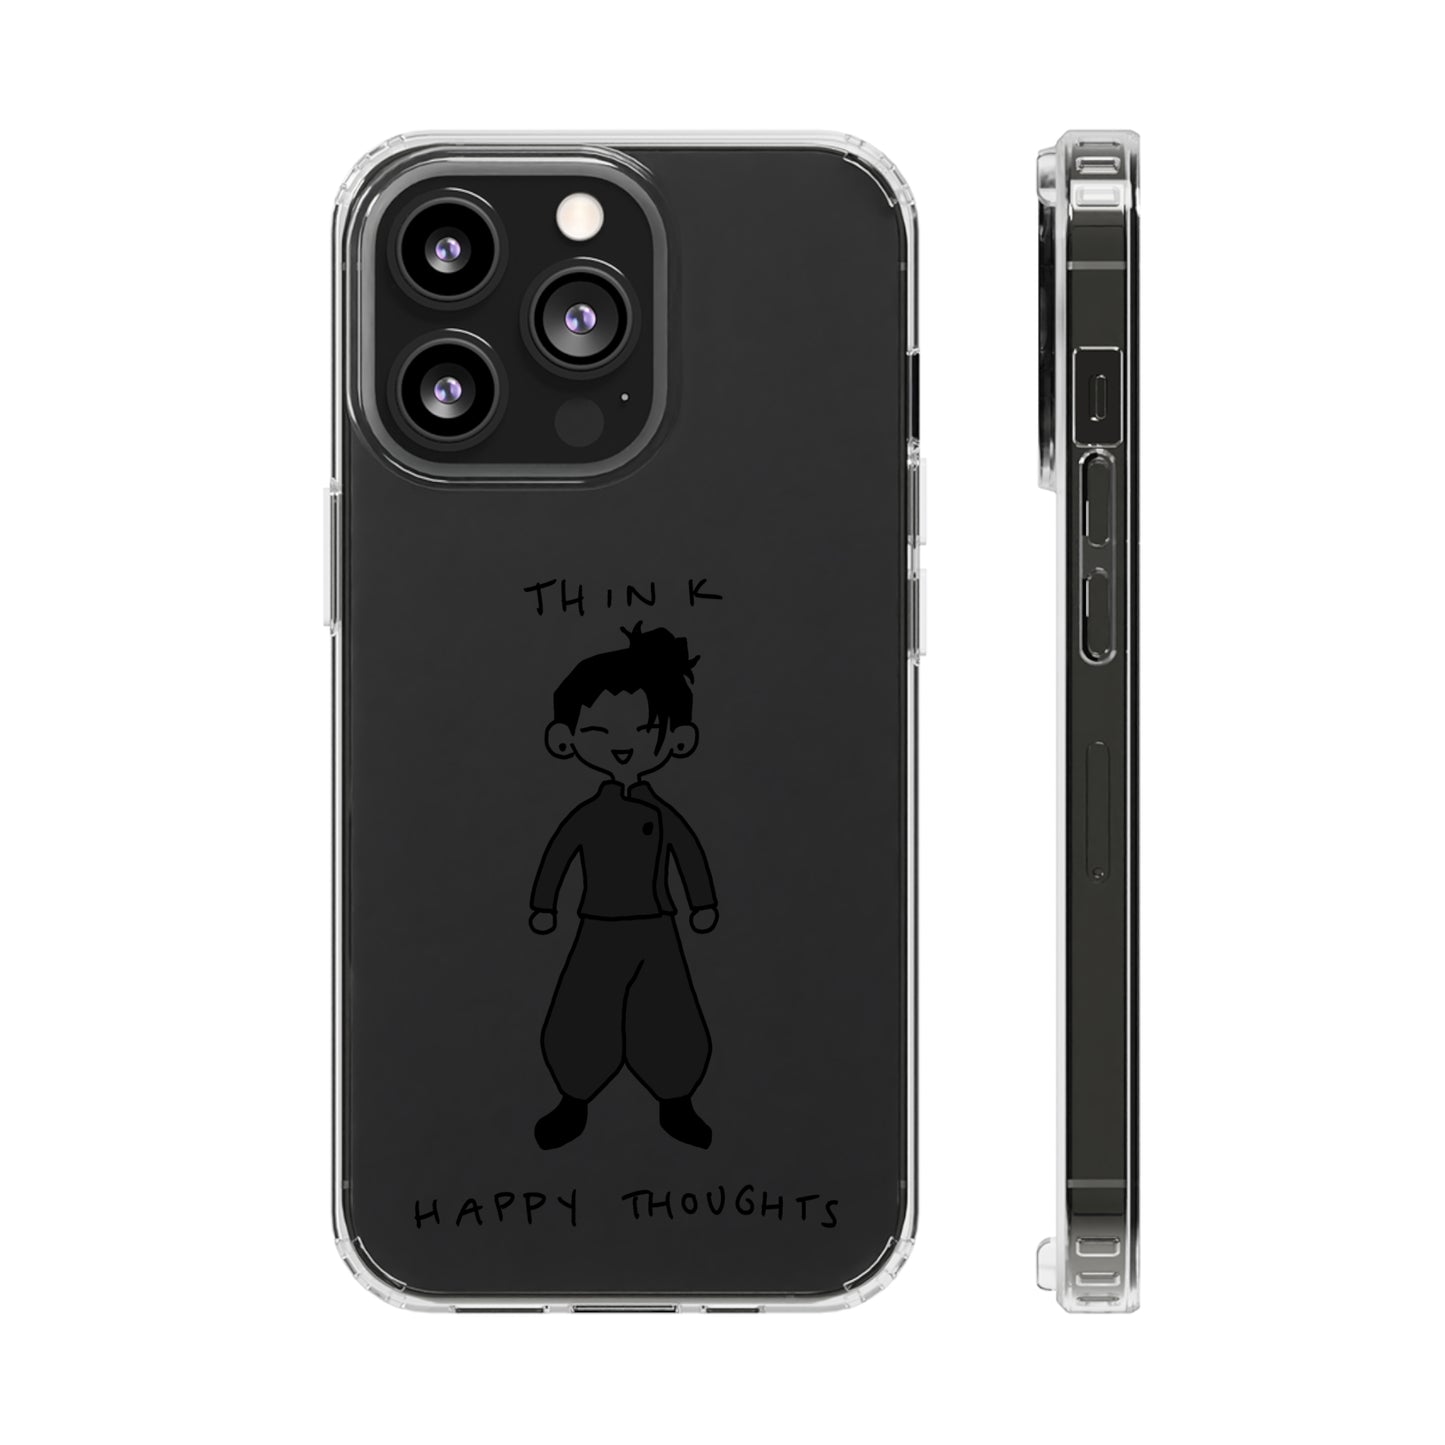 Think Happy Thoughts Phone Case